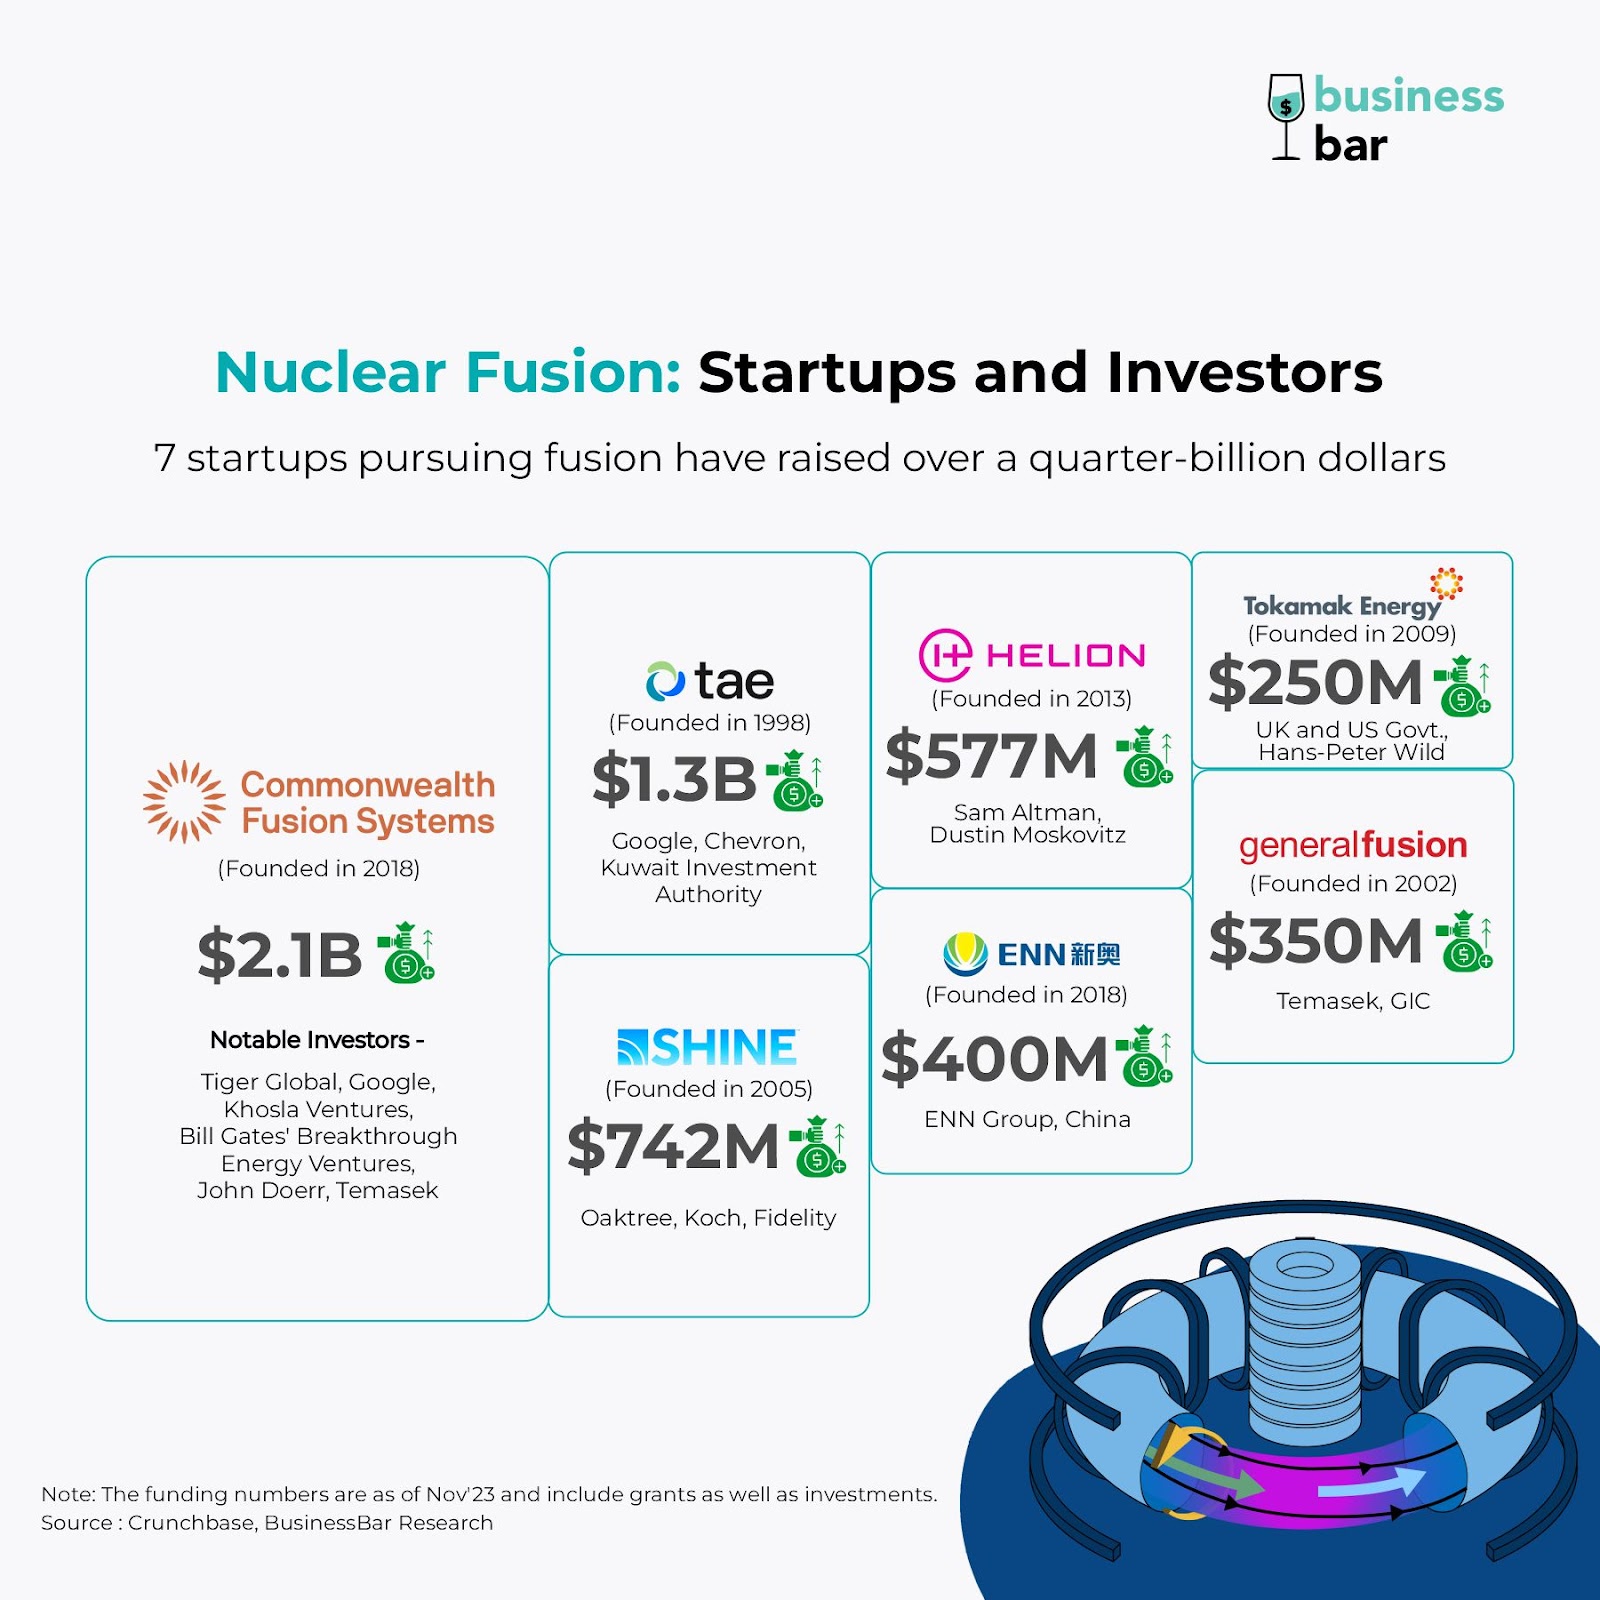 Nuclear Fusion Startups and Investors